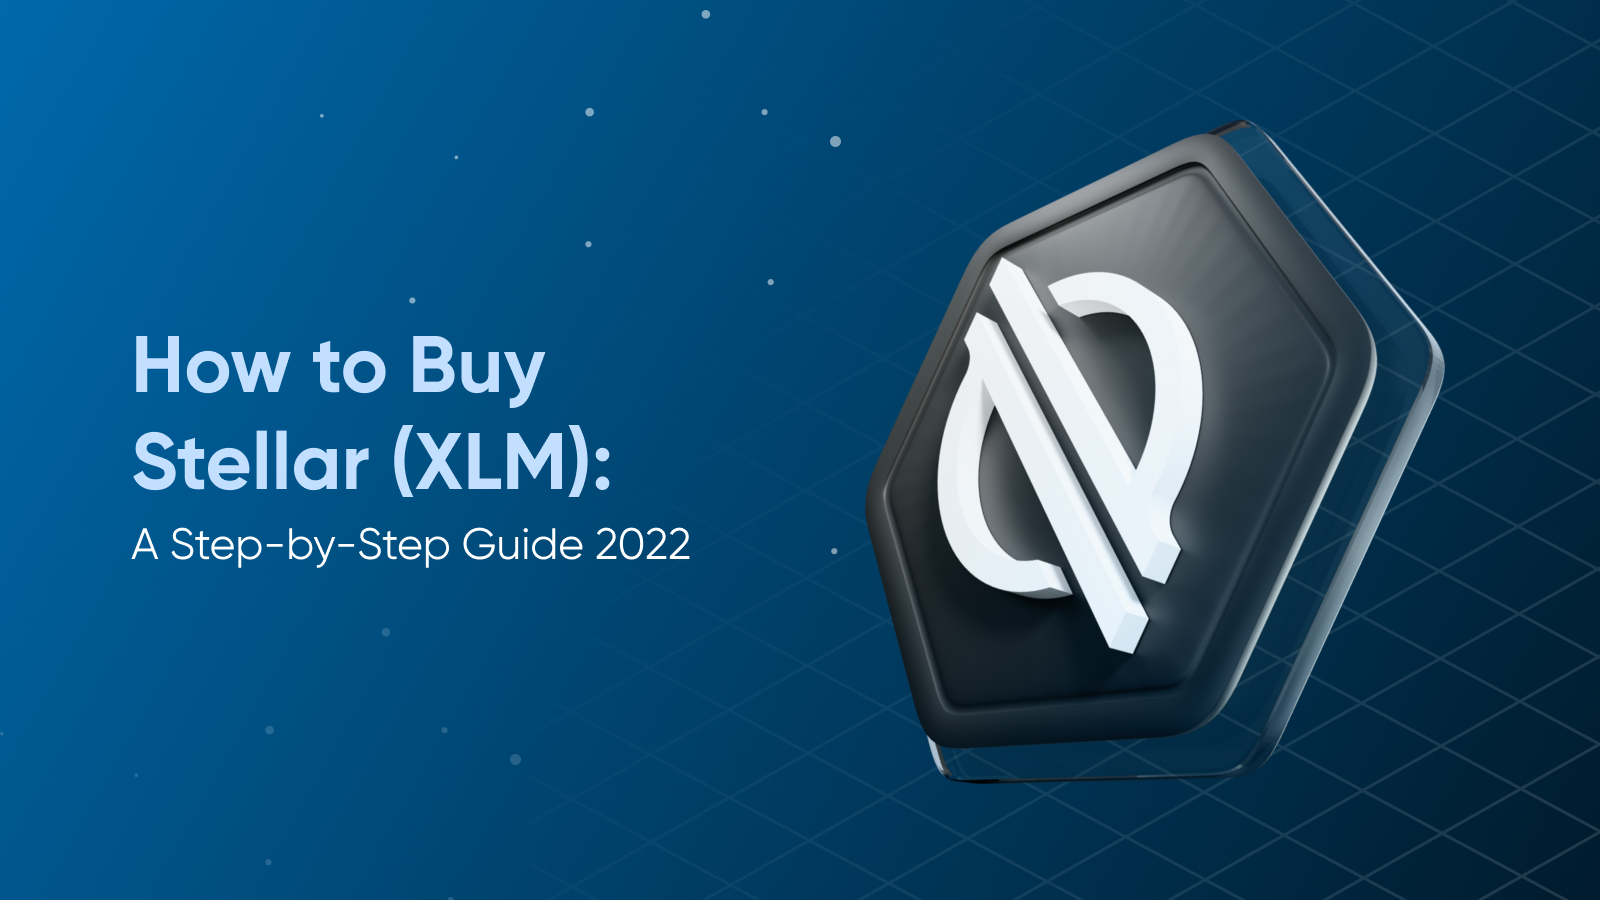 How to Buy Stellar (XLM): A Step-by-Step Guide 2023